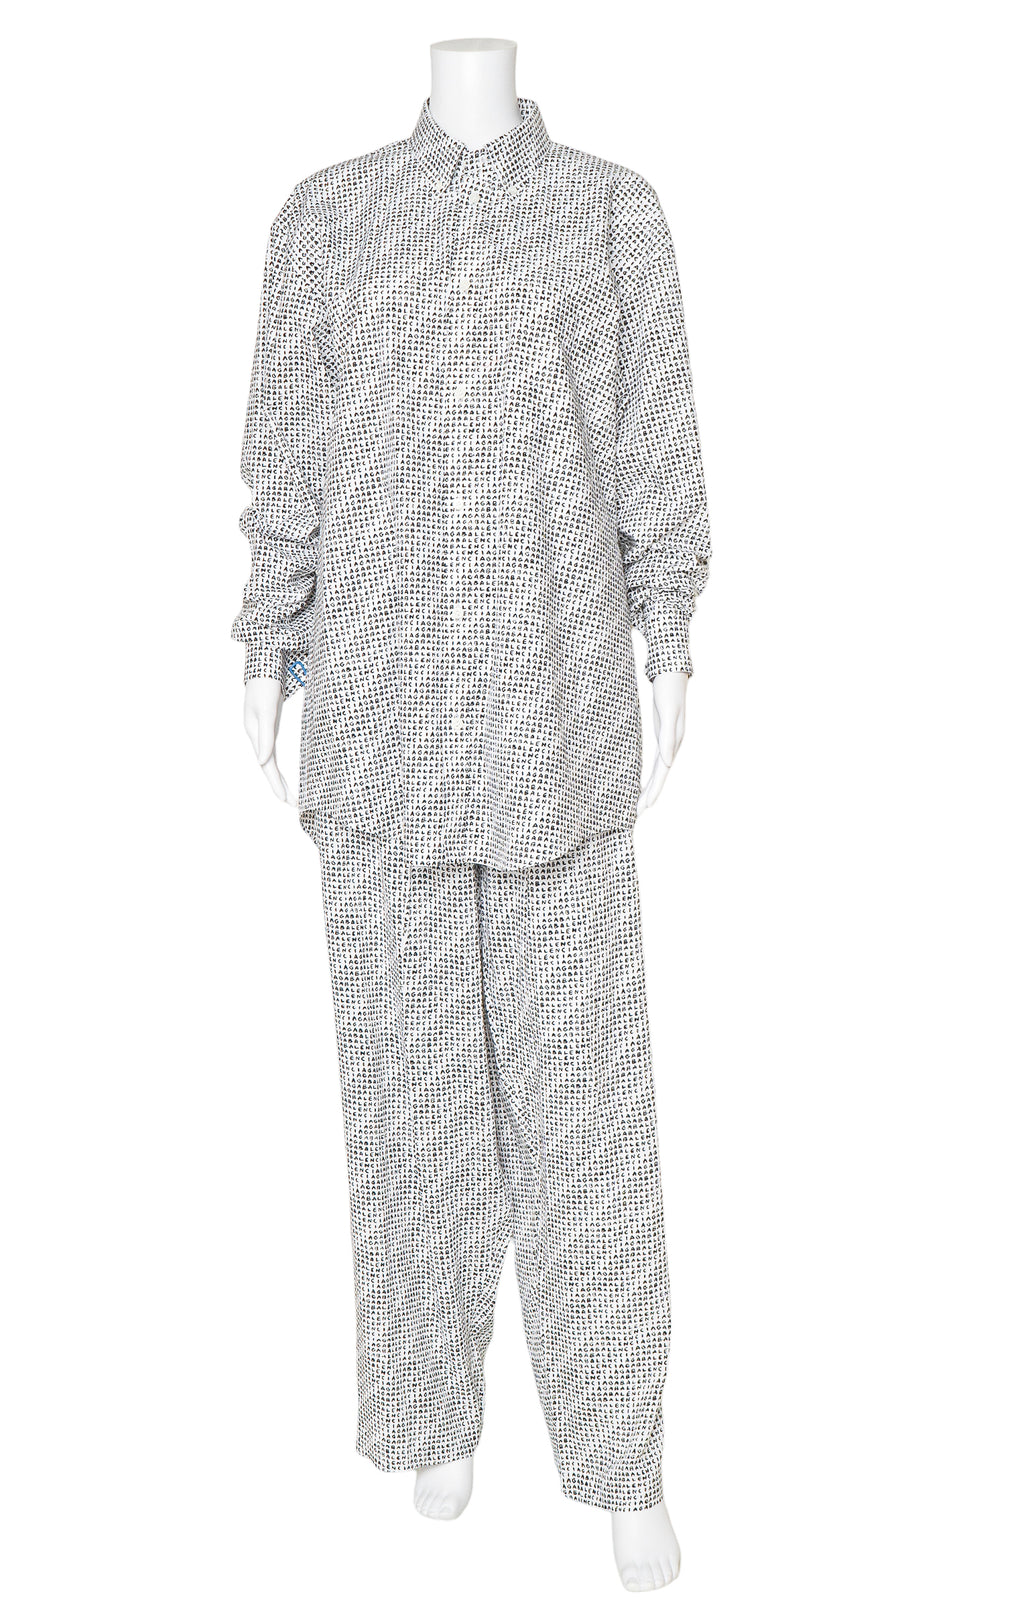 BALENCIAGA (NEW) with tags Pajama Set Size: Top - FR 38 / Comparable to US M Pants - M